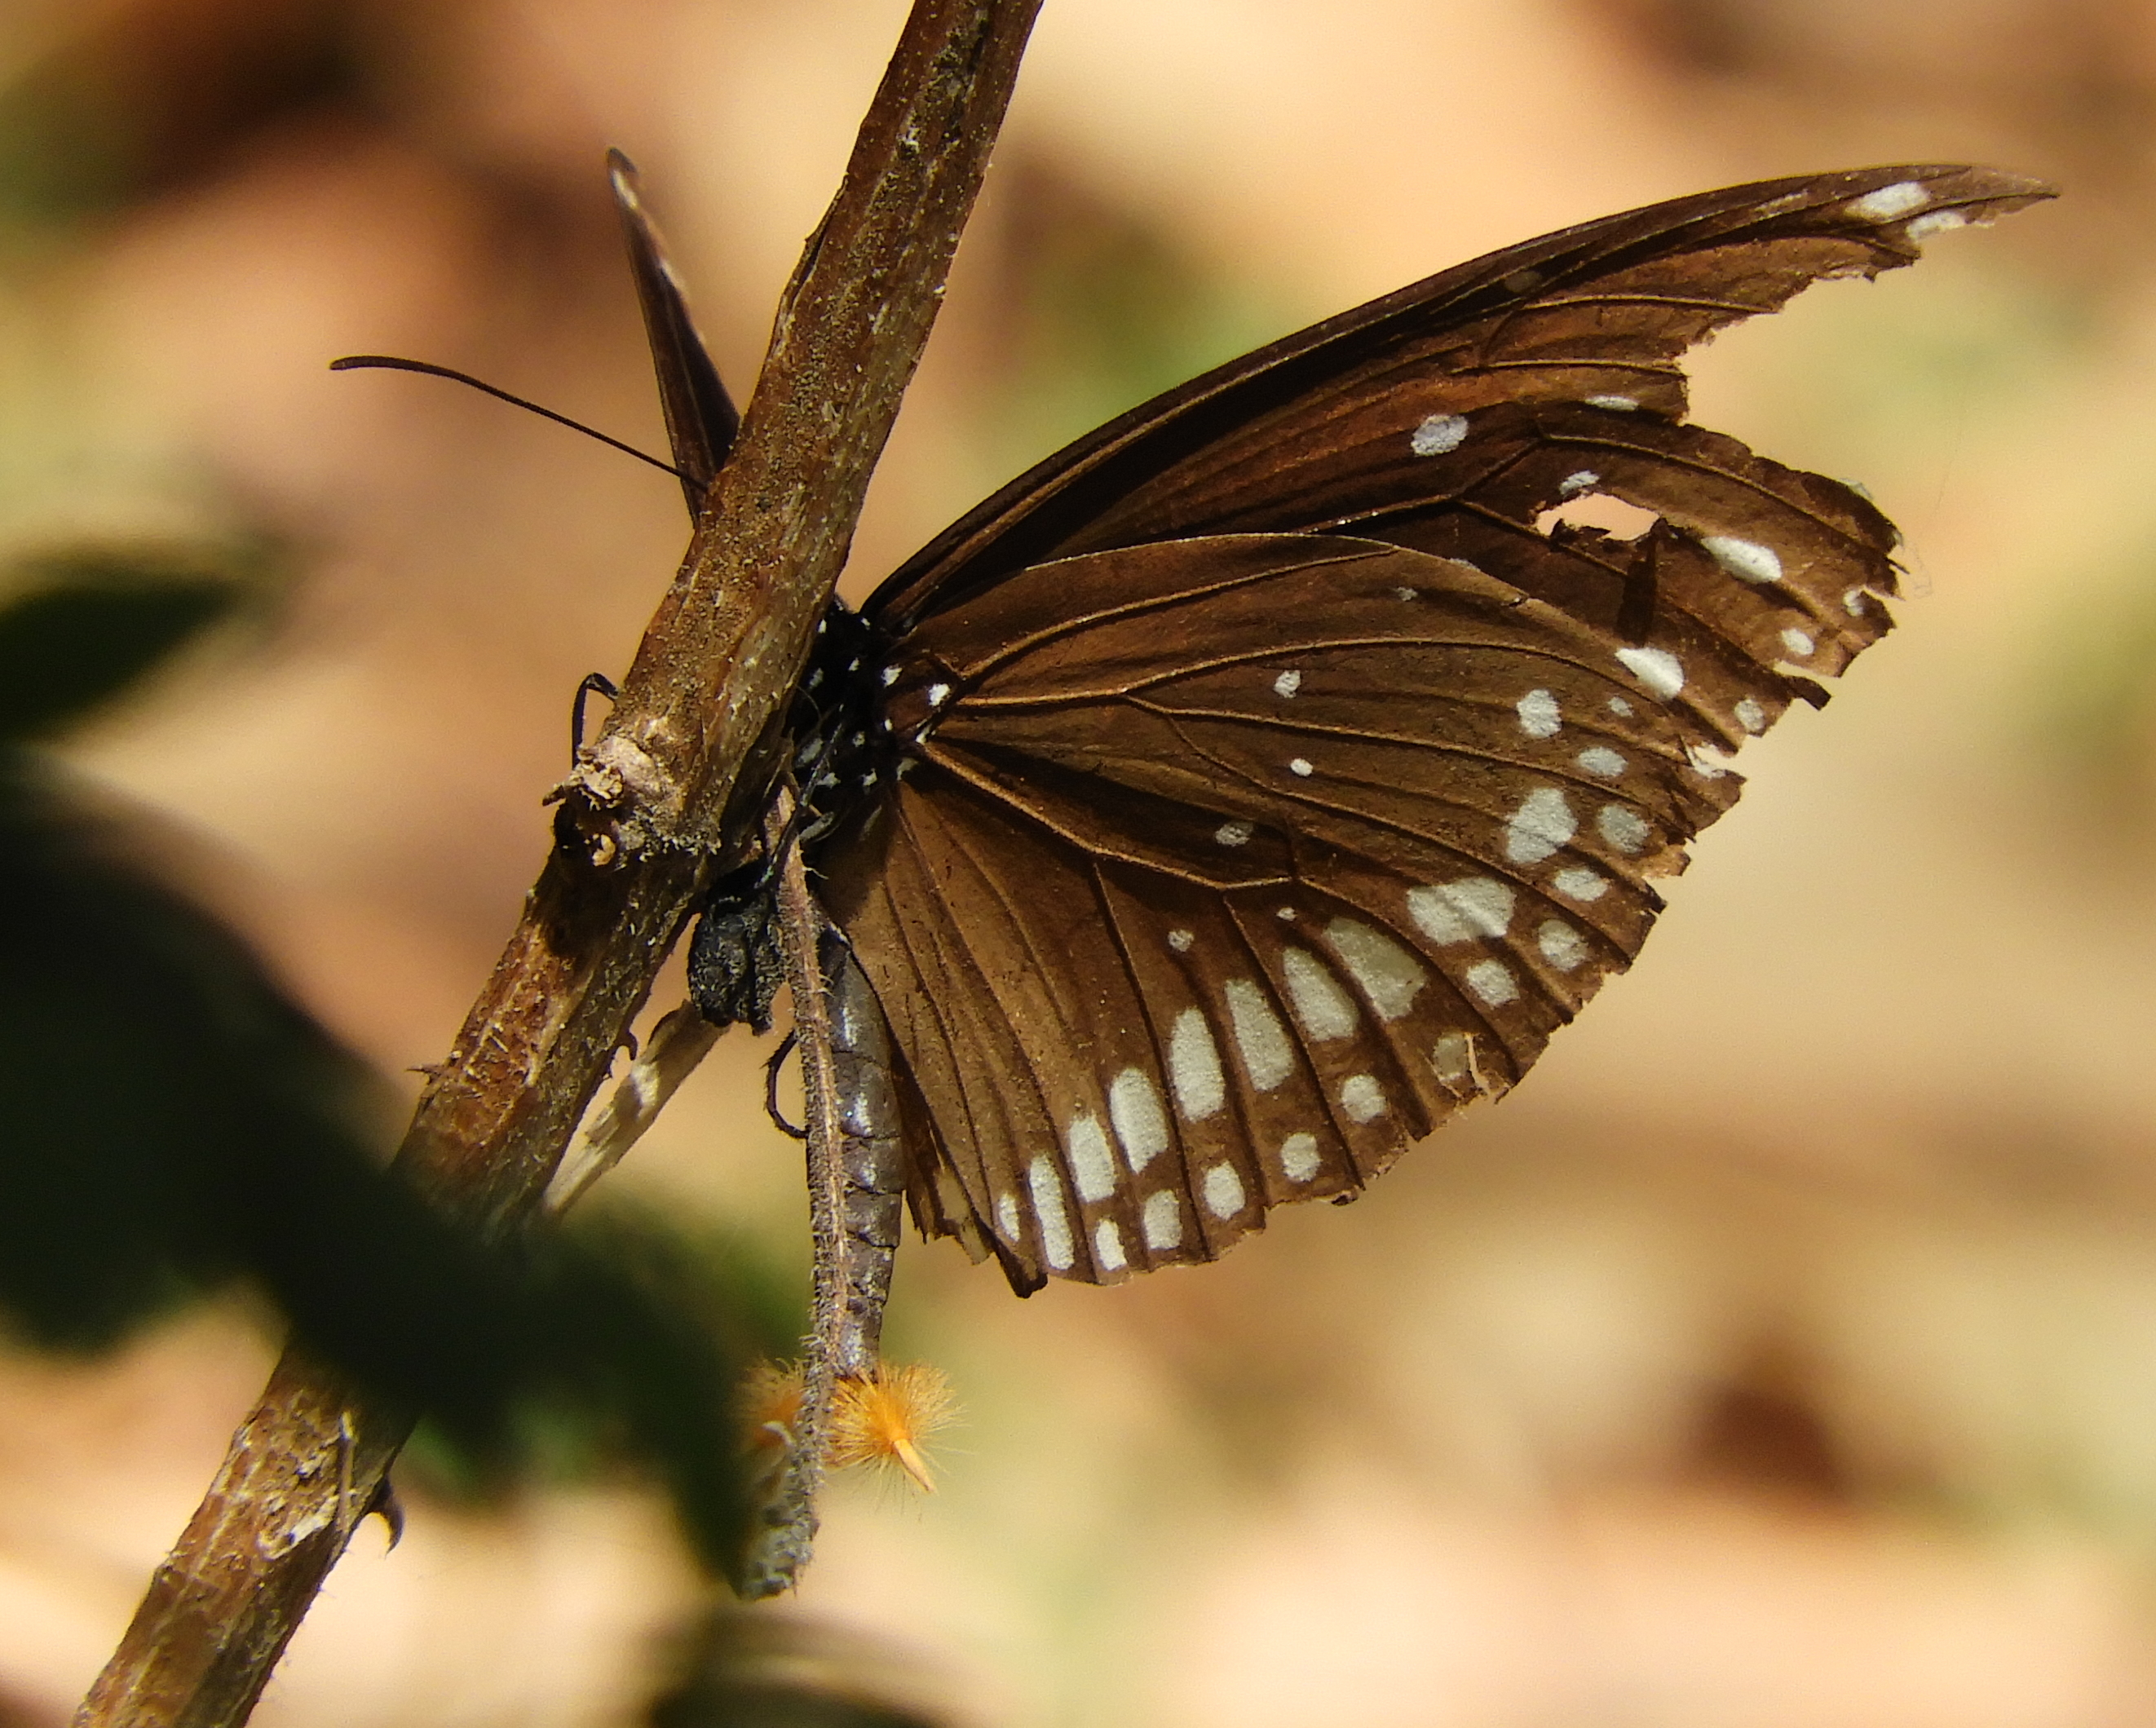 File:Common crow butterfly male with hair pencils everted to disperse sex  pheromone image by Sumita Roy DuttaDSCN0187.jpg - Wikipedia